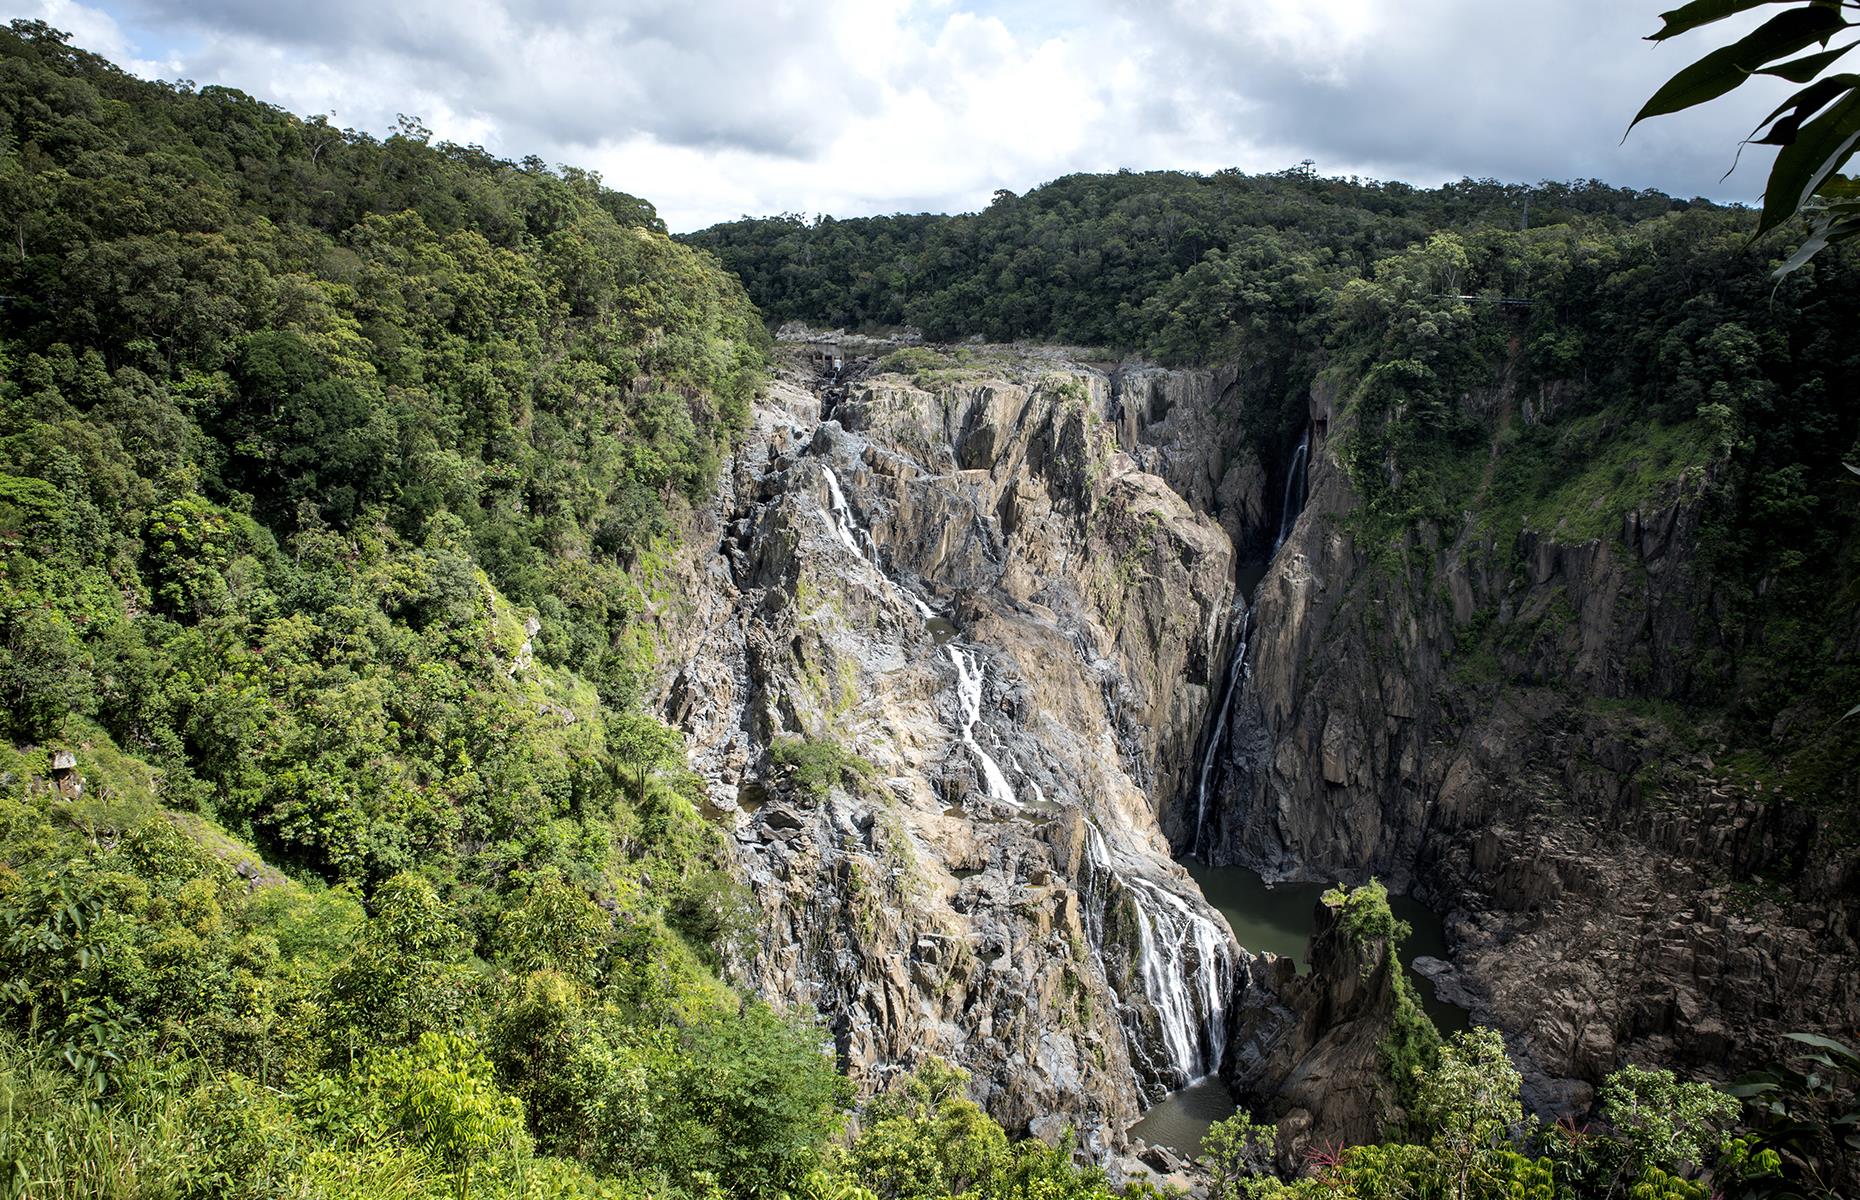 A one-way ticket costs $35 (£28) for adults and $18 (£14) for children. Many opt to take the railway to Kuranda and get the Skyrail Rainforest Cableway back, to experience the World Heritage-listed Wet Tropics of Queensland from a different angle.